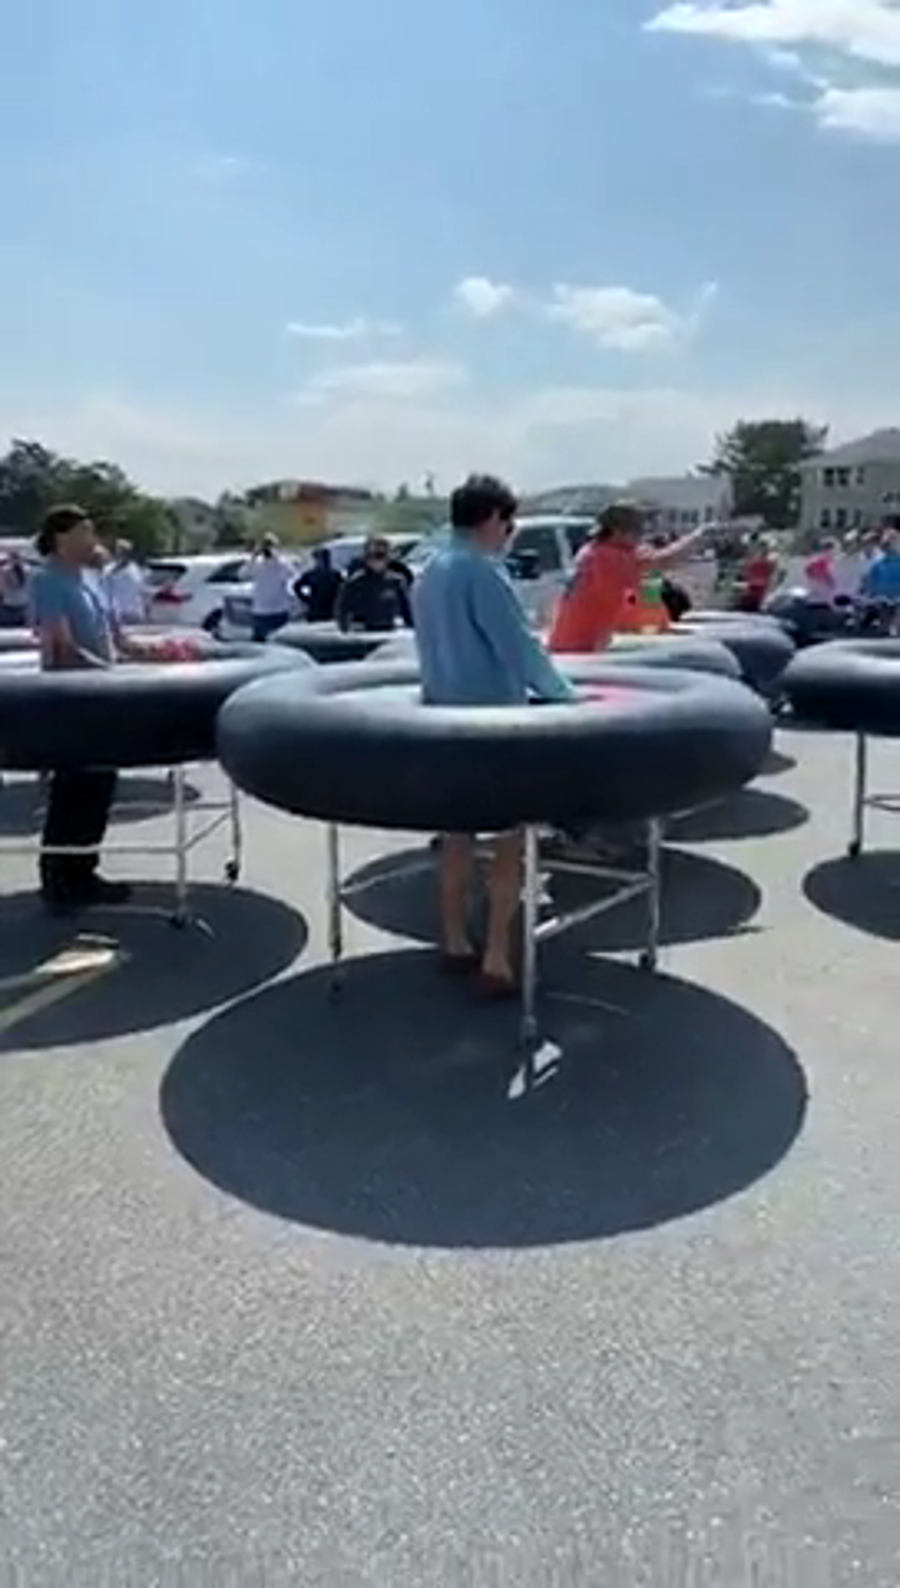 Fish Tales in Ocean City, Md., debuted bumper-style tables developed by Revolution Event Design and Production to keep customers 6 feet apart.